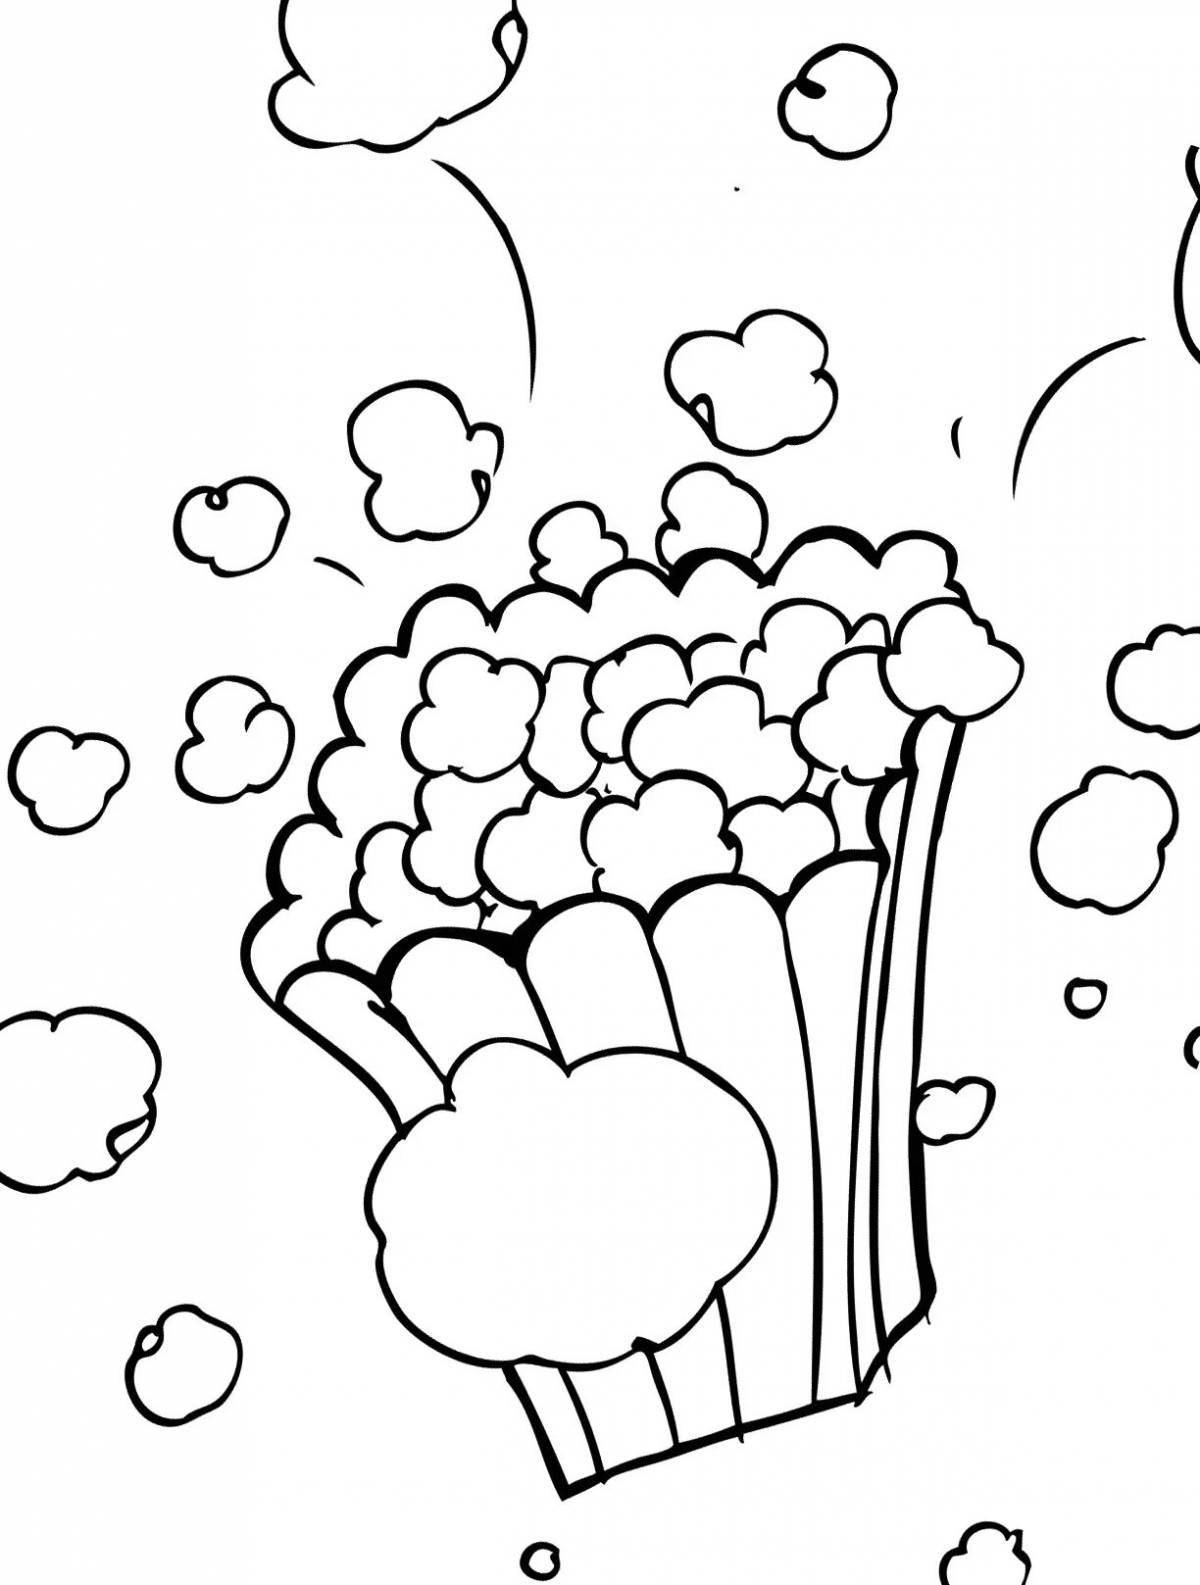 Colorful popcorn coloring book for kids